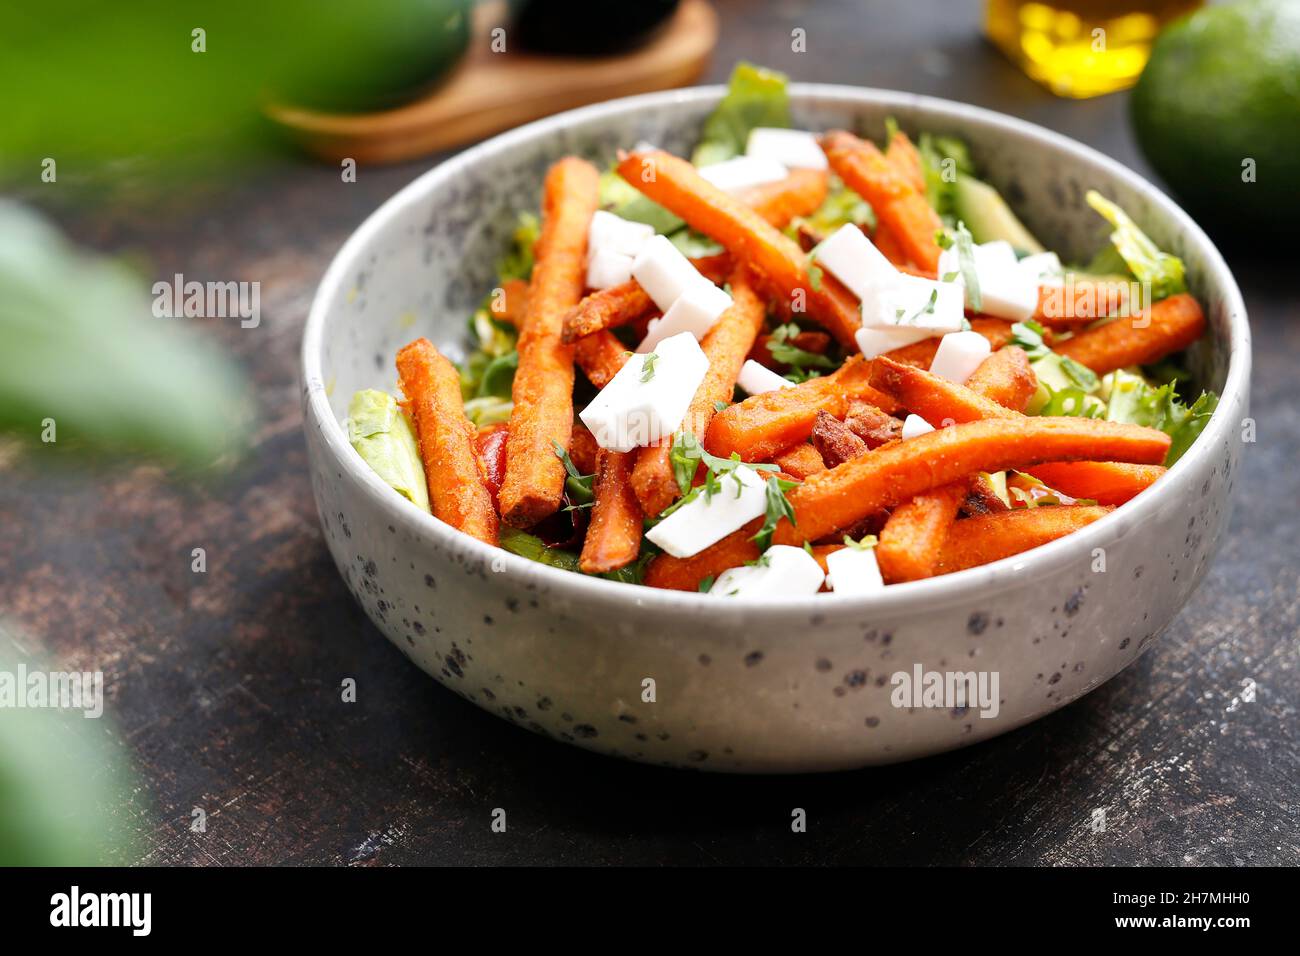 Sweet potato fries on green lettuce. Appetizing dish. Culinary photography, a proposal to serve a meal. Stock Photo